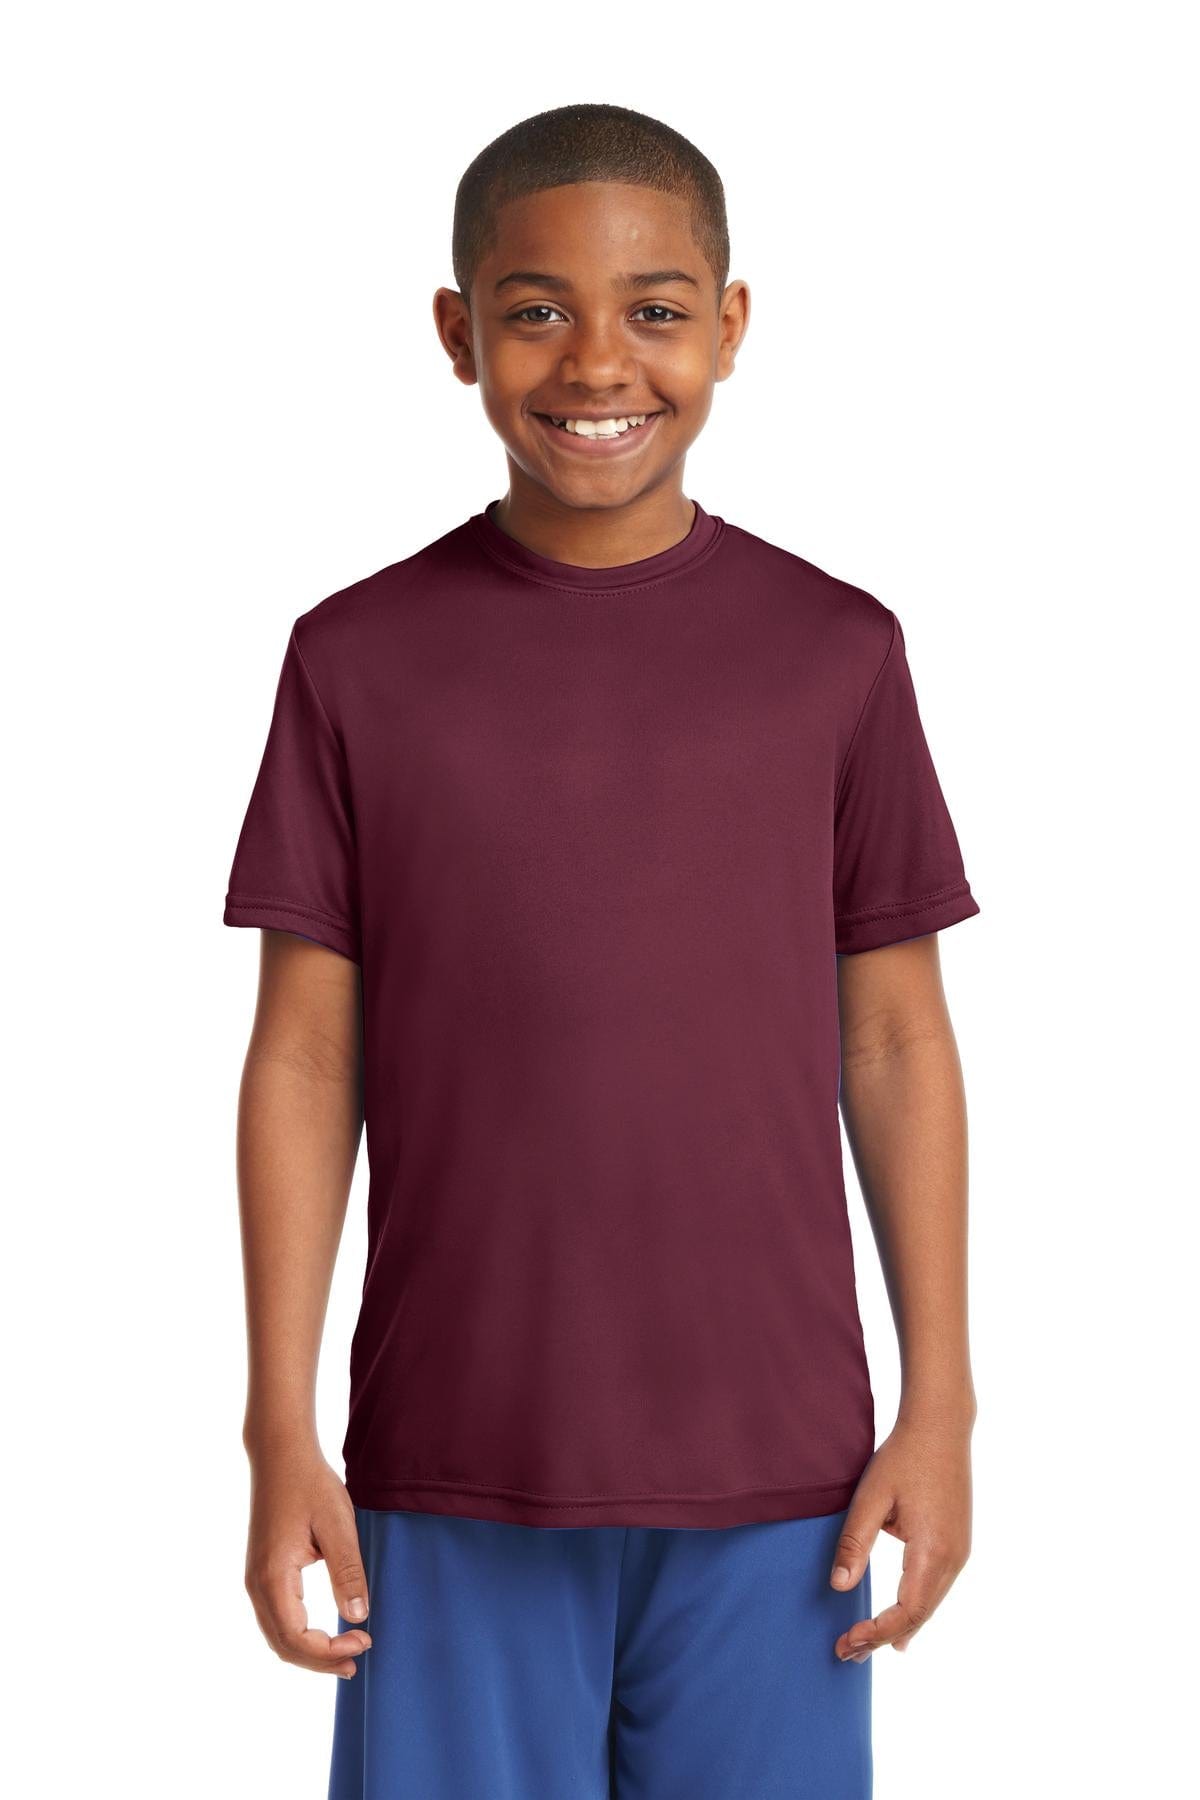 Sport-Tek ® Youth PosiCharge ® Competitor™ Tee. YST350, Basic Colors